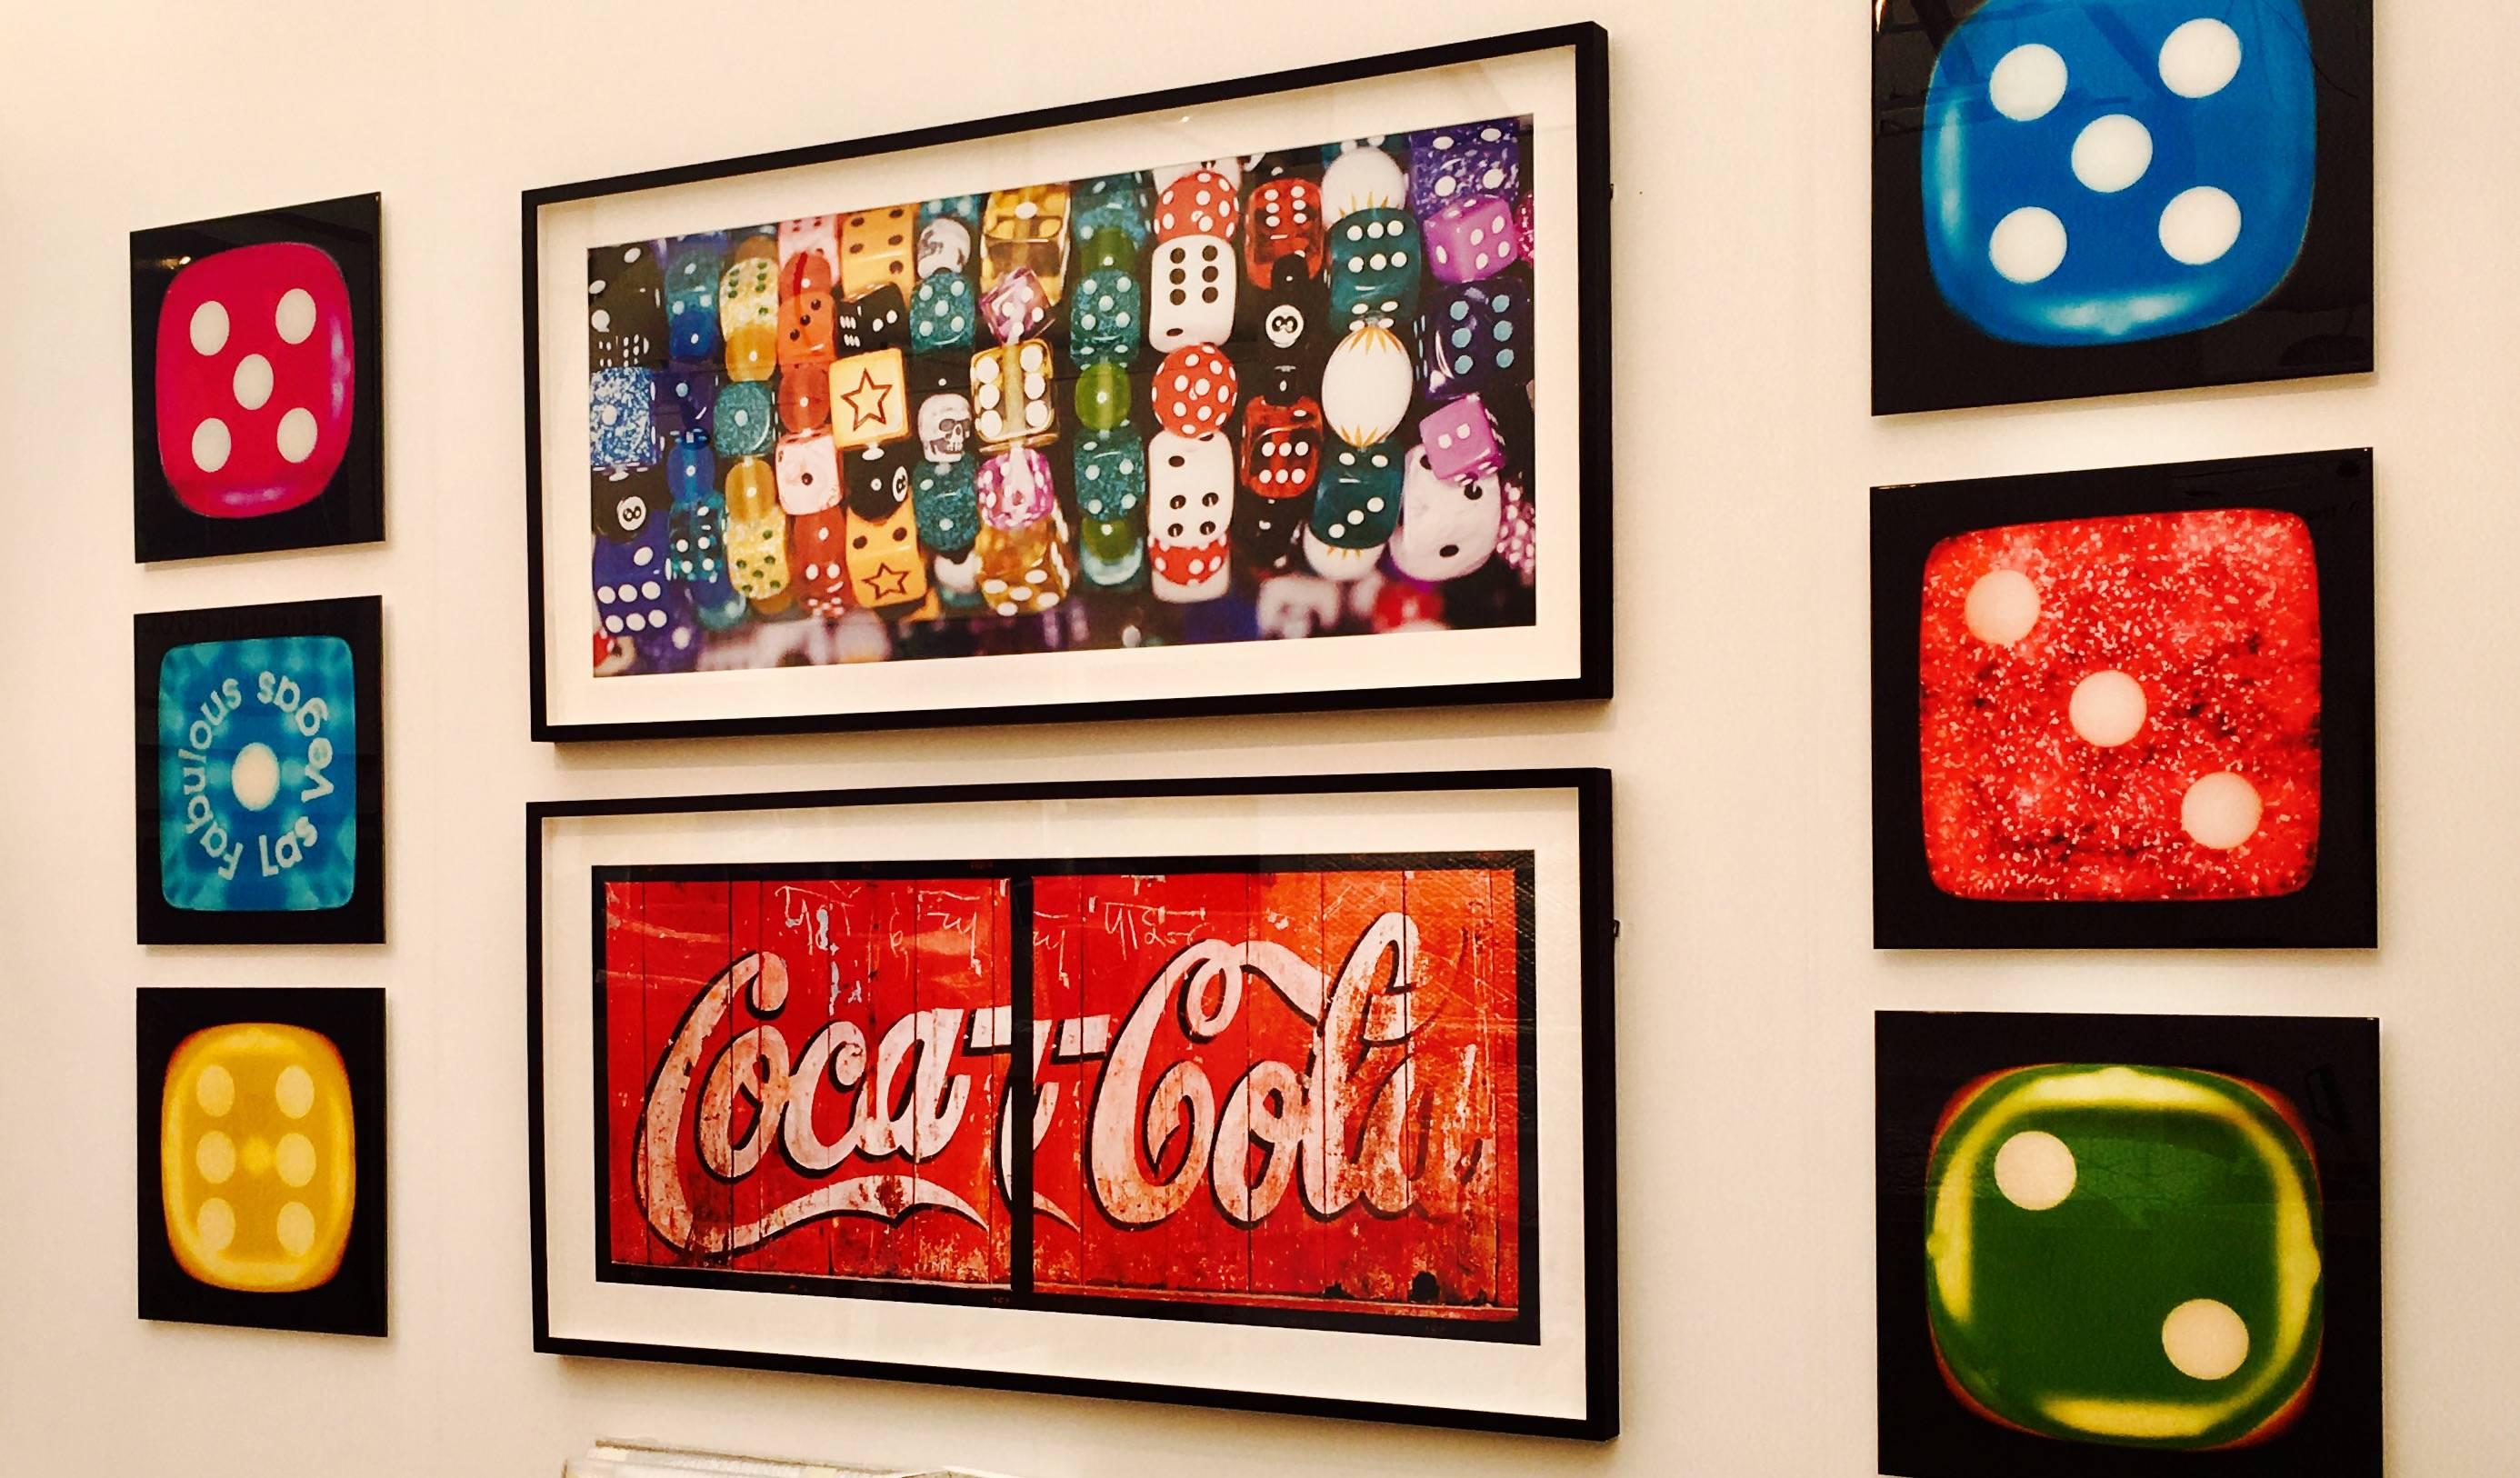 Indian Coca-Cola, Darjeeling, West Bengal - Contemporary Color Photography - Red Print by Richard Heeps